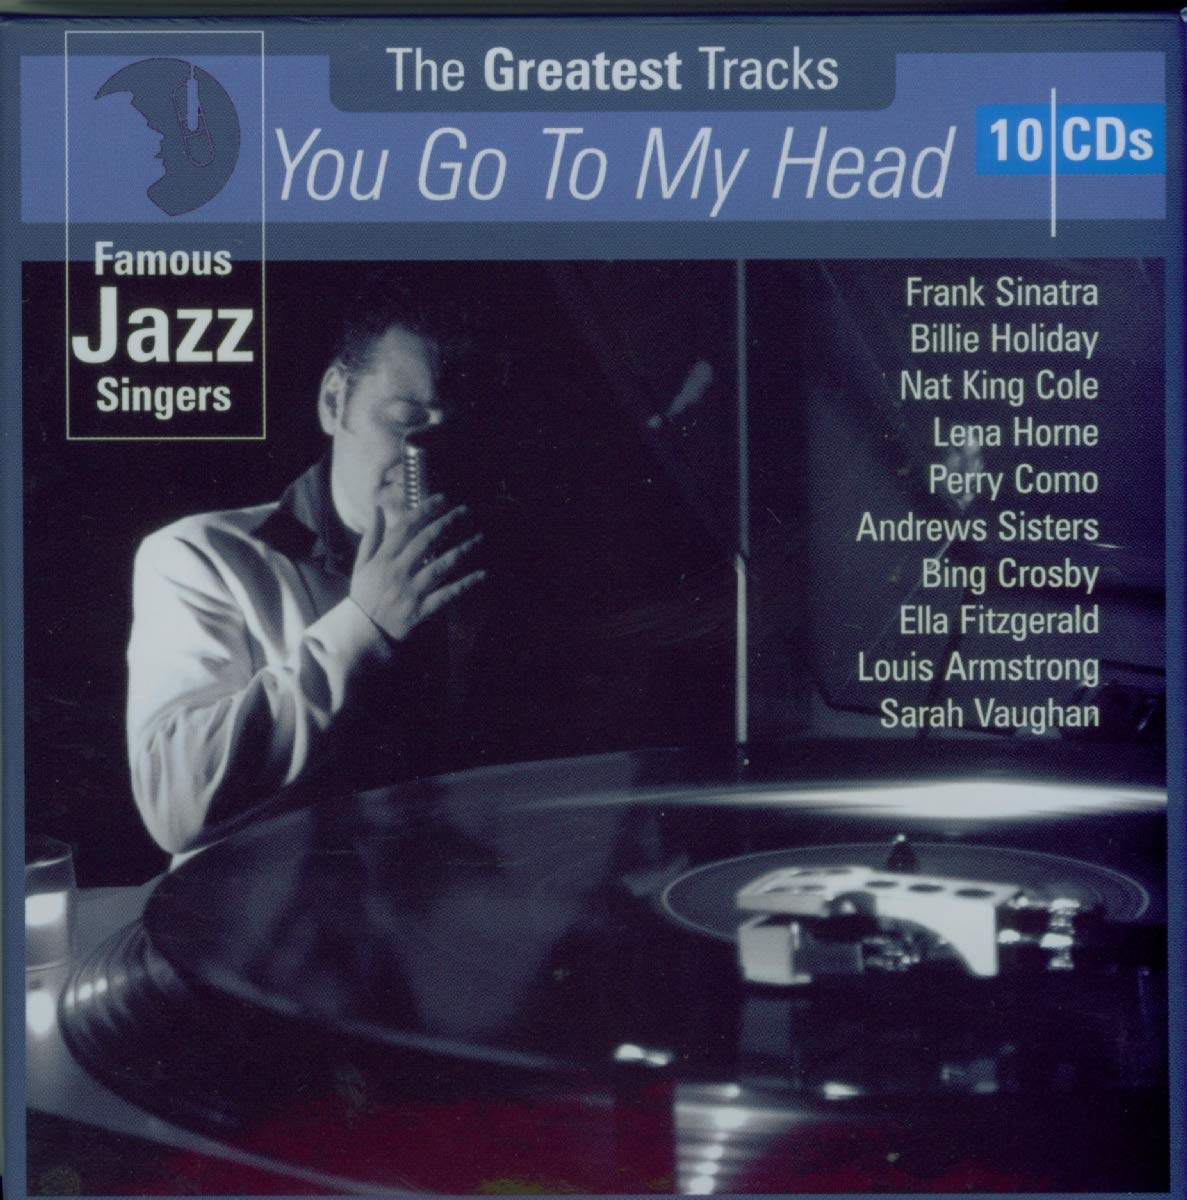 You Go To My Head:  Famous Jazz Singers (10 CDs)